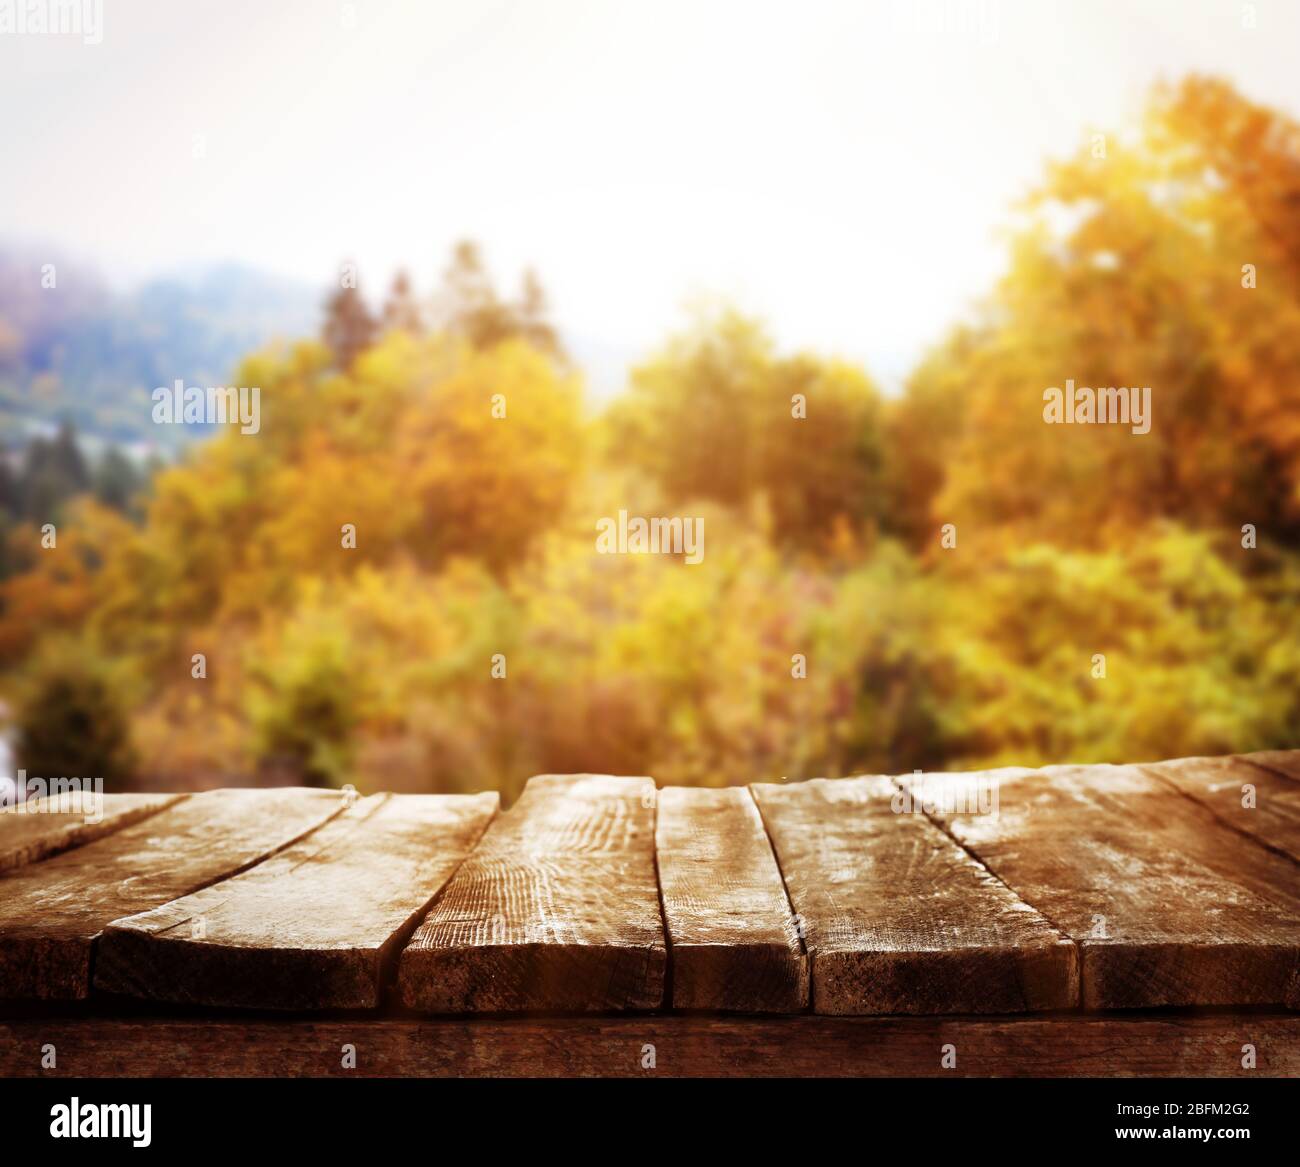 Beautiful nature background with wooden floor Stock Photo